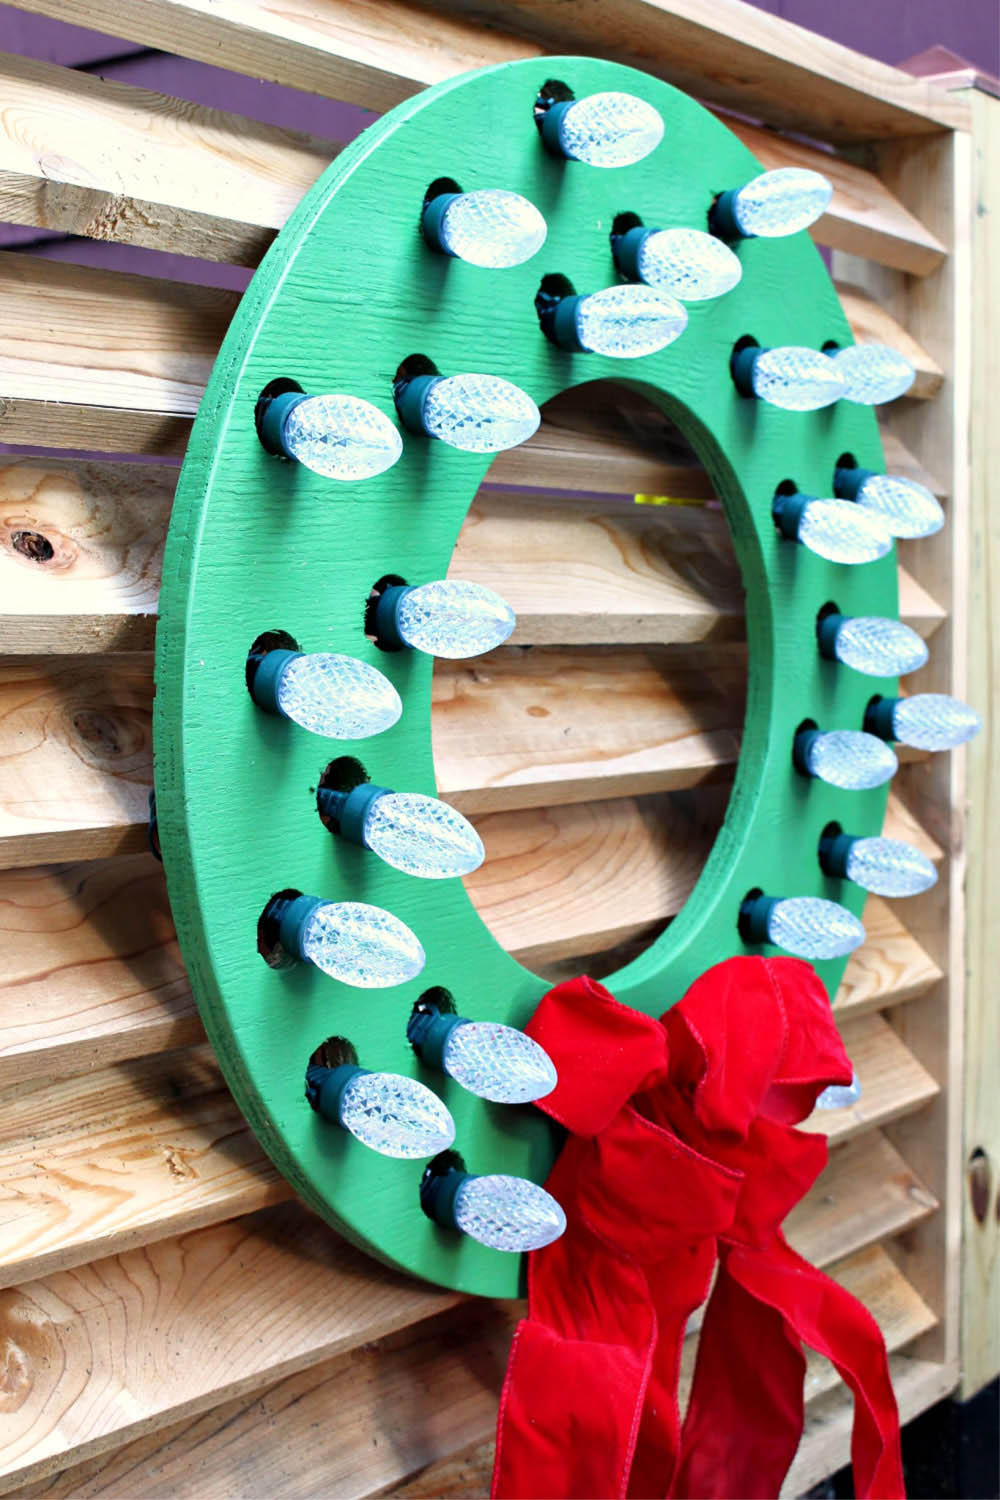 A green wooden wreath with lights and a red bow.